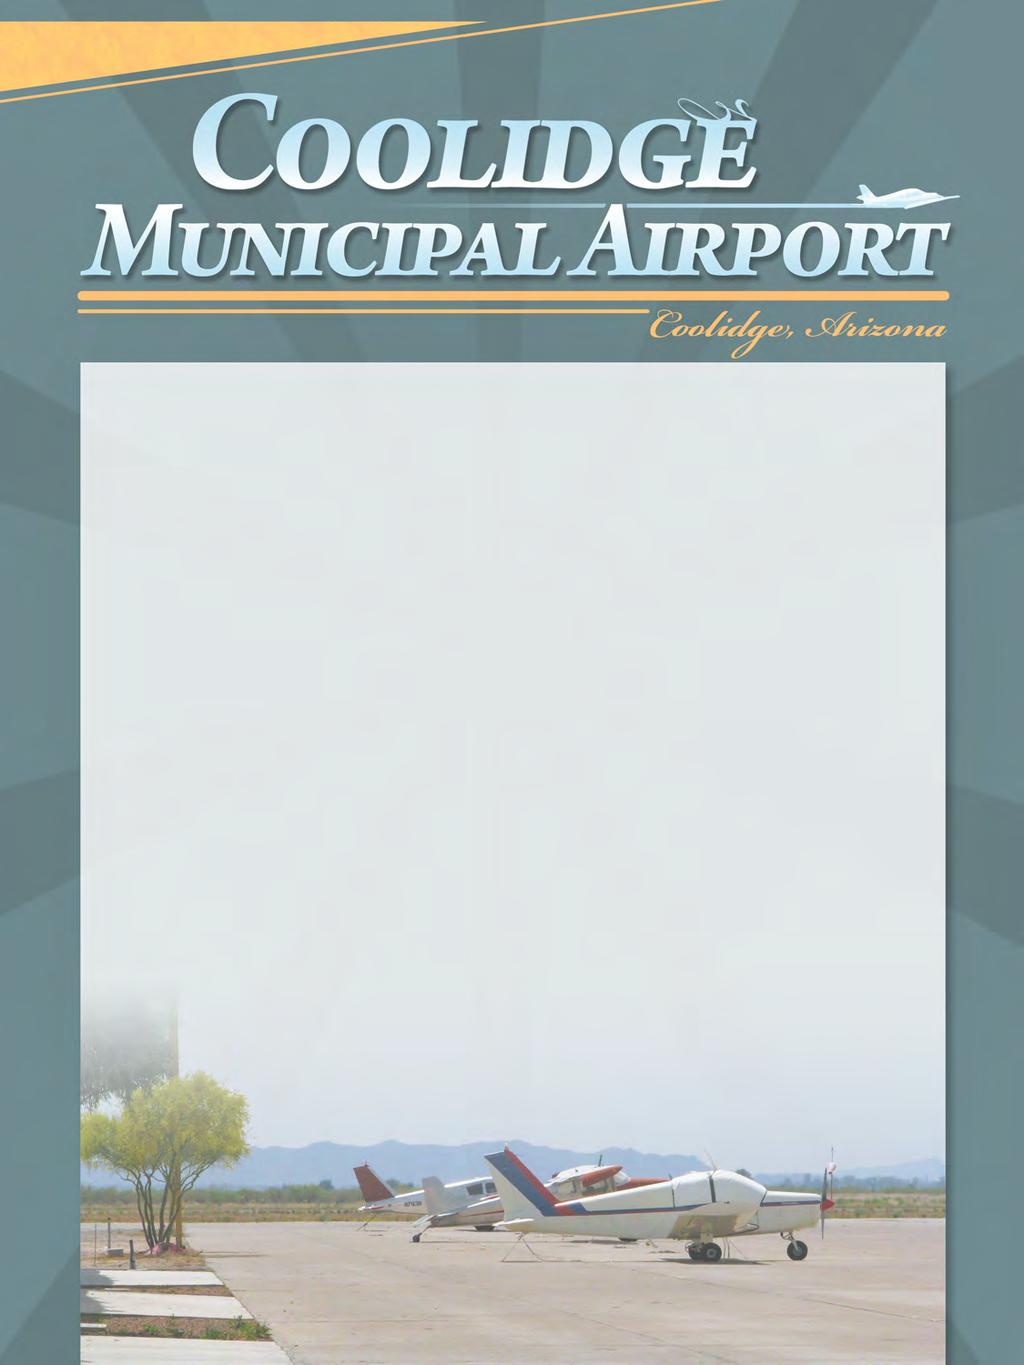 chapter 2 Forecasts airport master plan An important factor in facility planning involves a definition of demand that may reasonably be expected to occur during the useful life of the facility s key